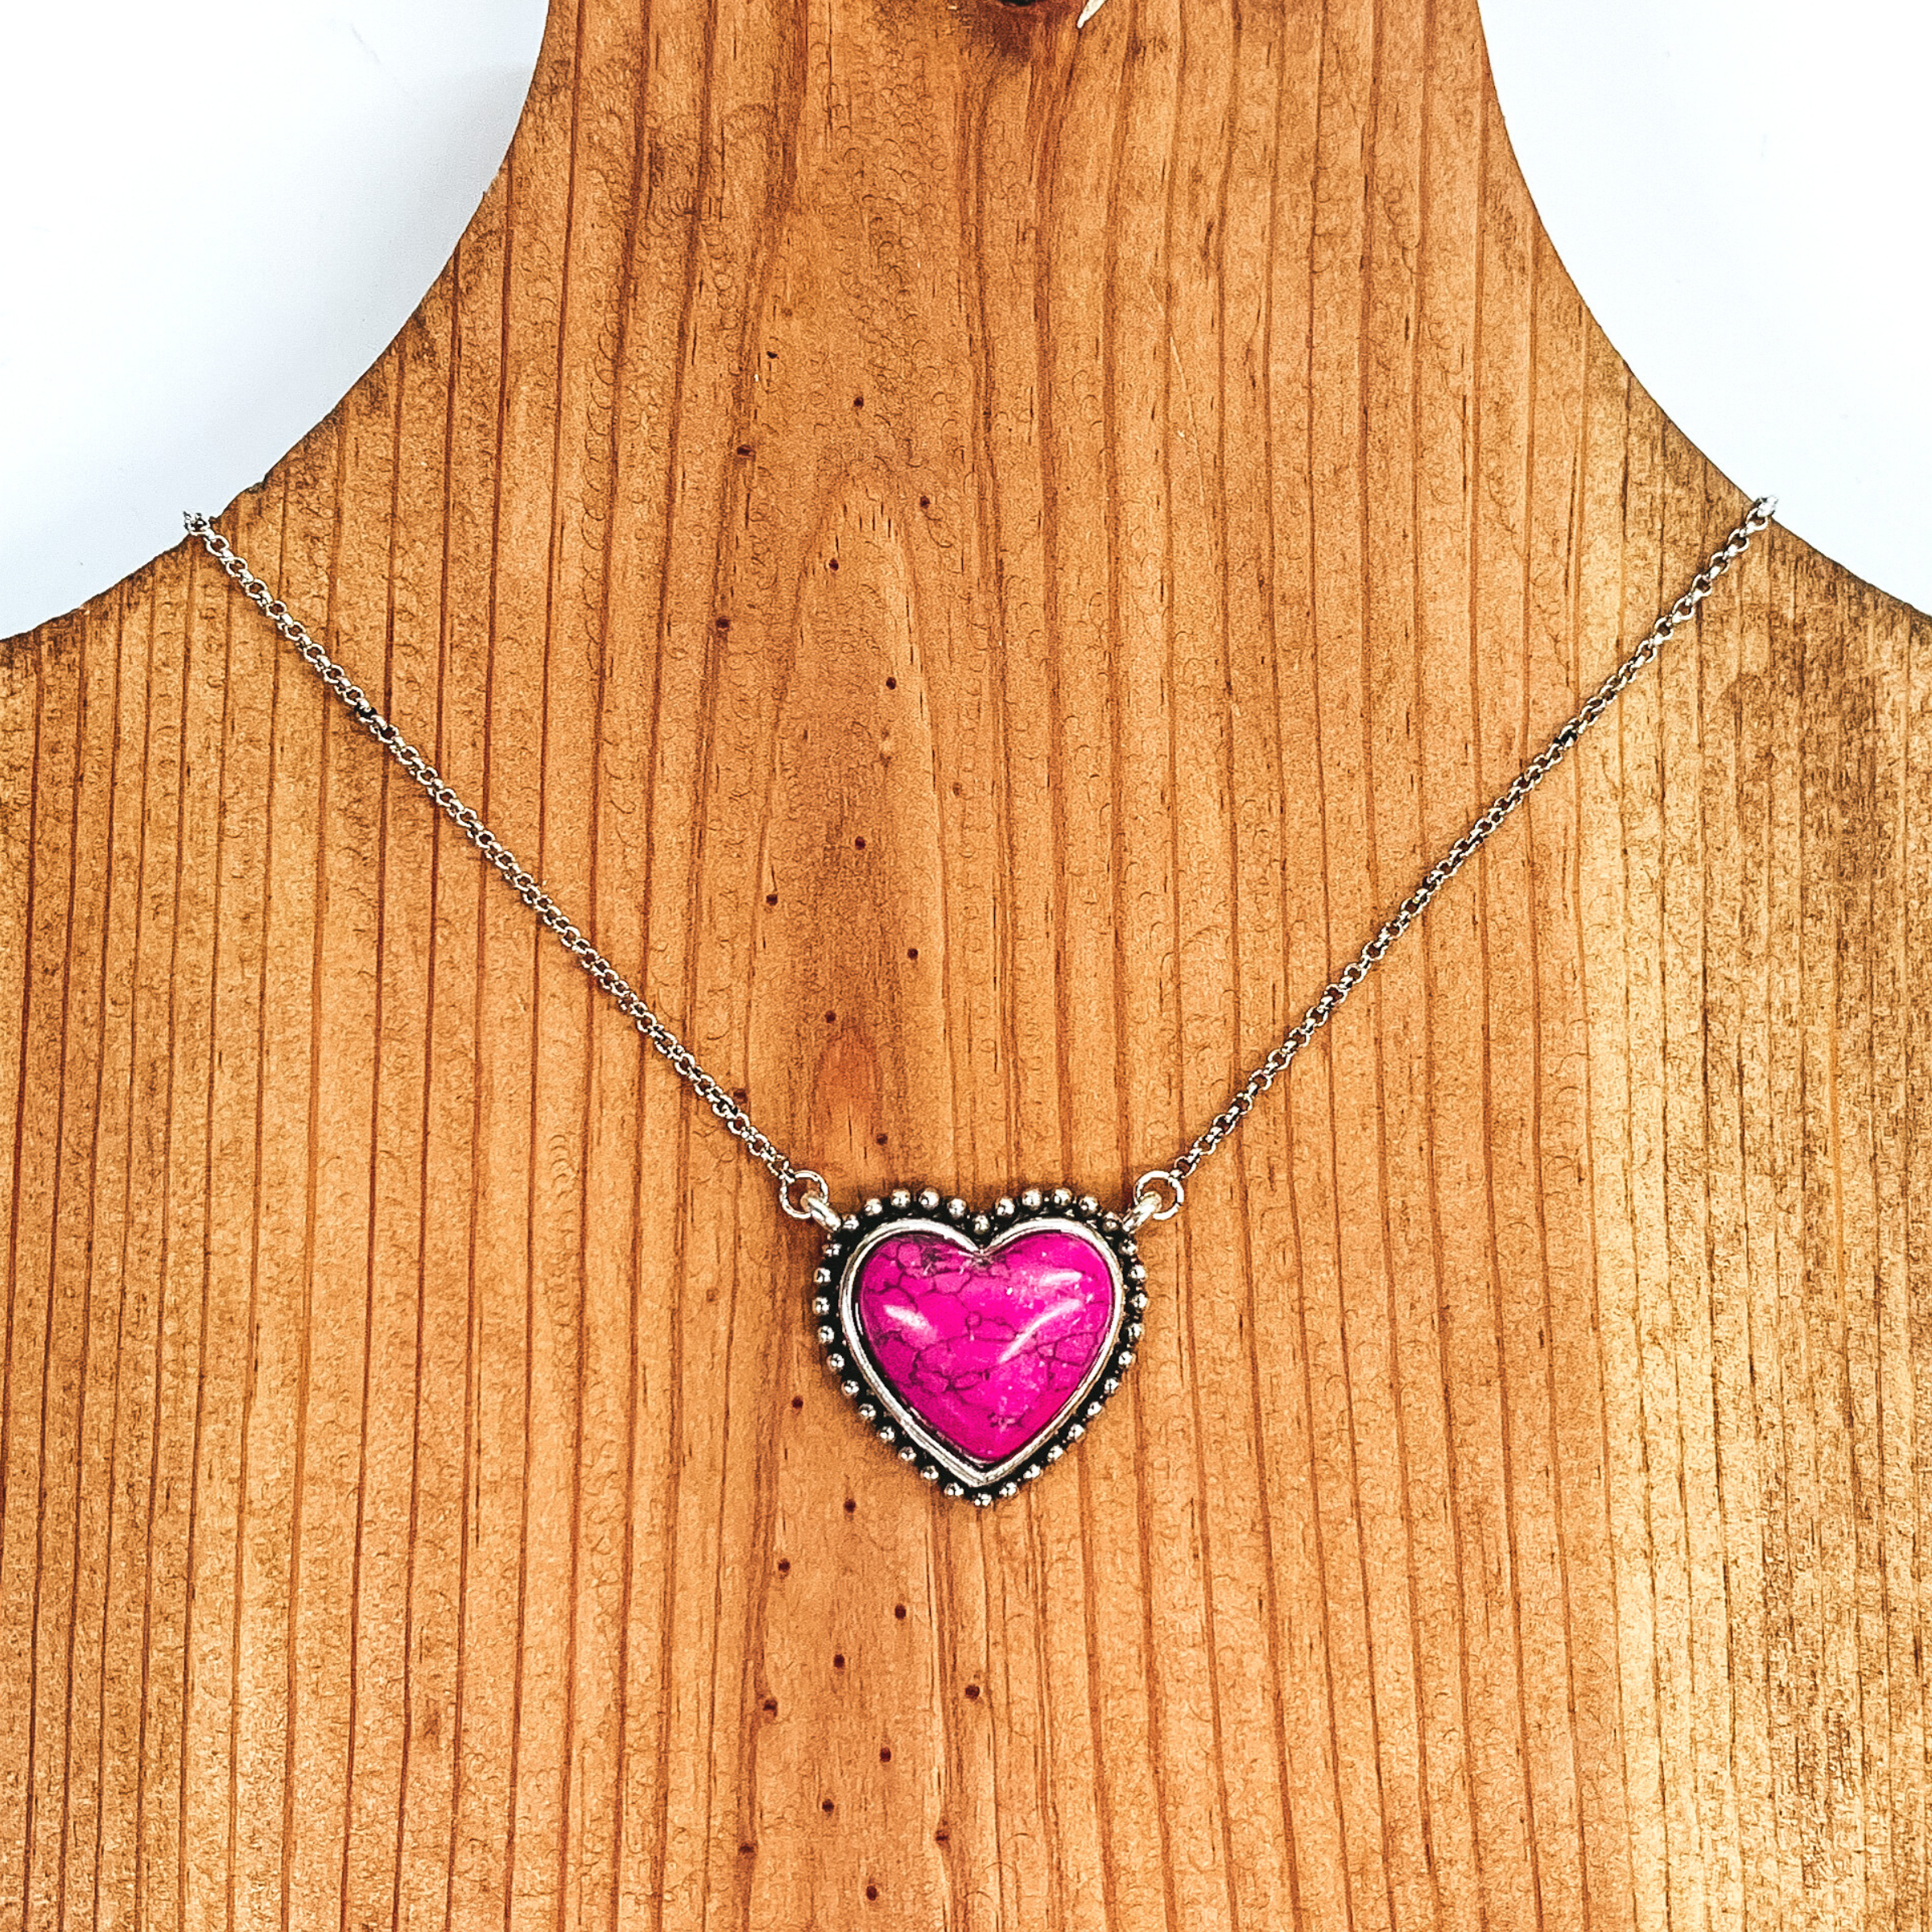 Silver chained necklace with a small pink, heart shaped stone pendant. This necklace is pictured laying on a brown necklace holder on a white and black background.